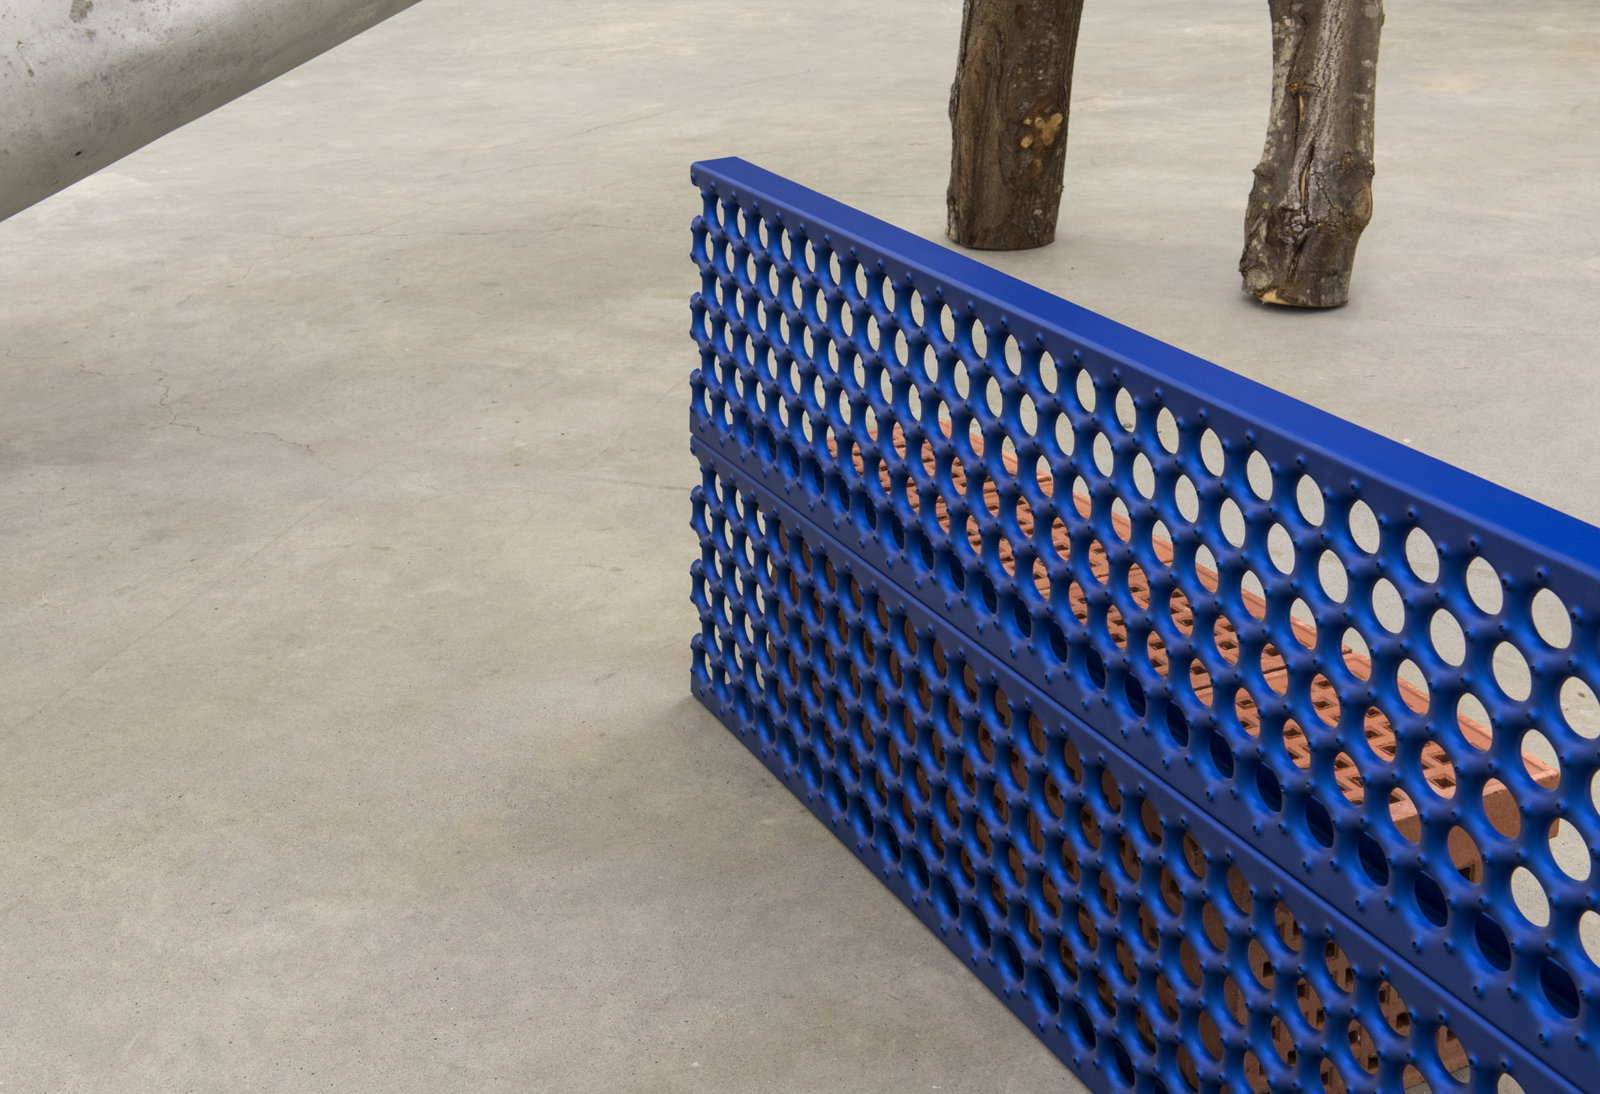 Jerry Pethick, Trough (detail), 2001, wood, plastic, clay, anodized aluminum, sandblasted aluminum, 70 x 134 x 120 in. (178 x 340 x 305 cm)